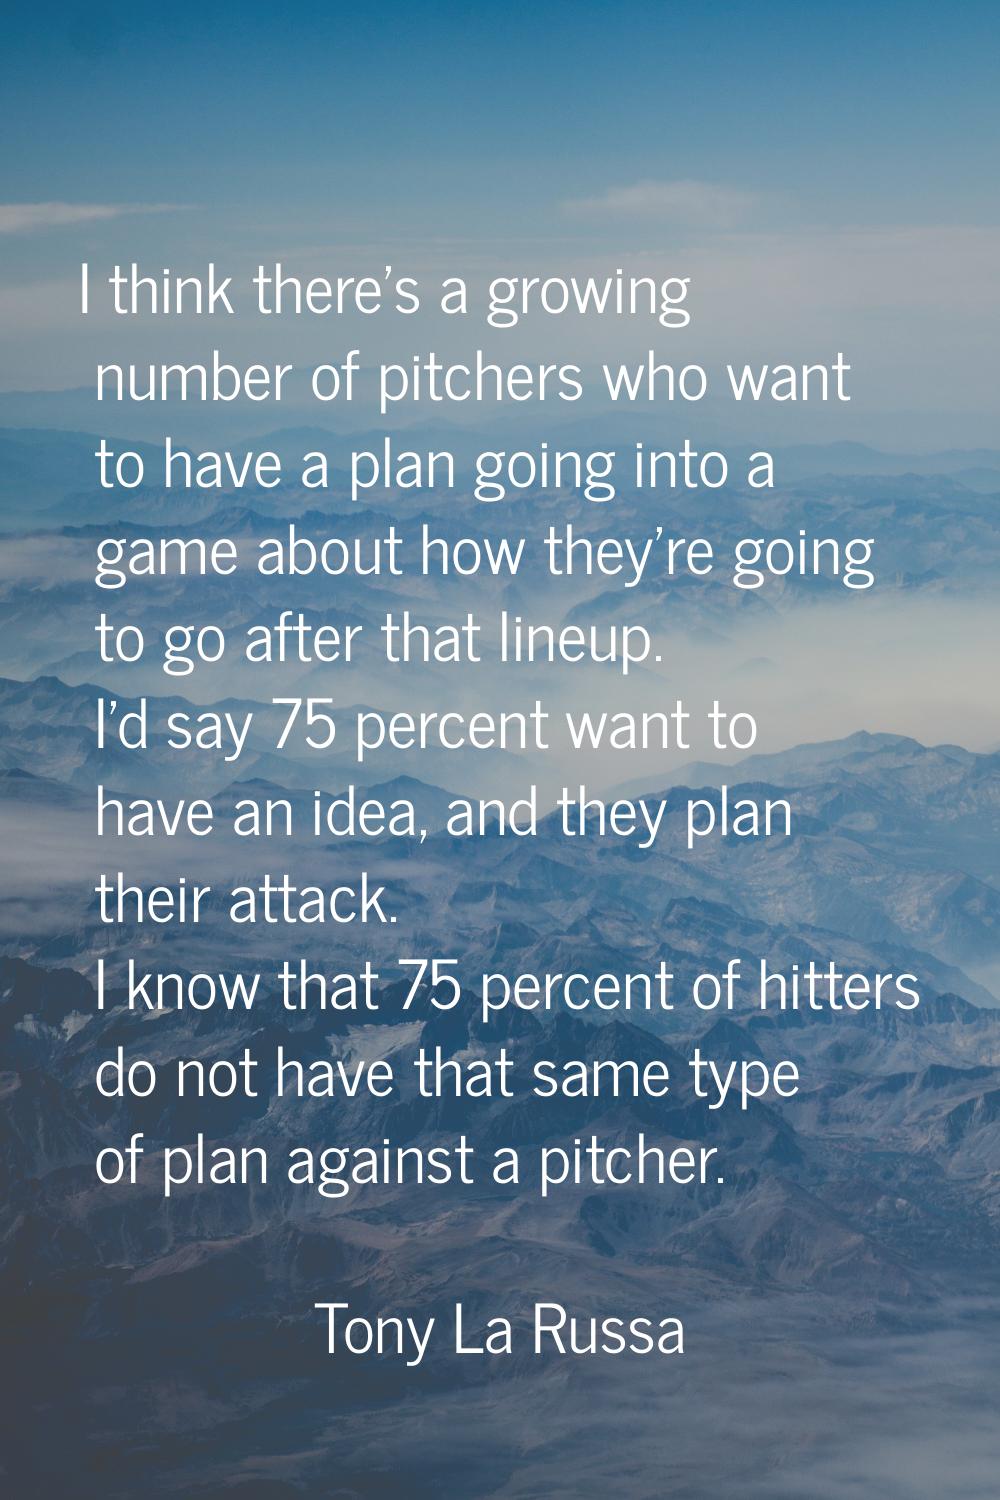 I think there's a growing number of pitchers who want to have a plan going into a game about how th